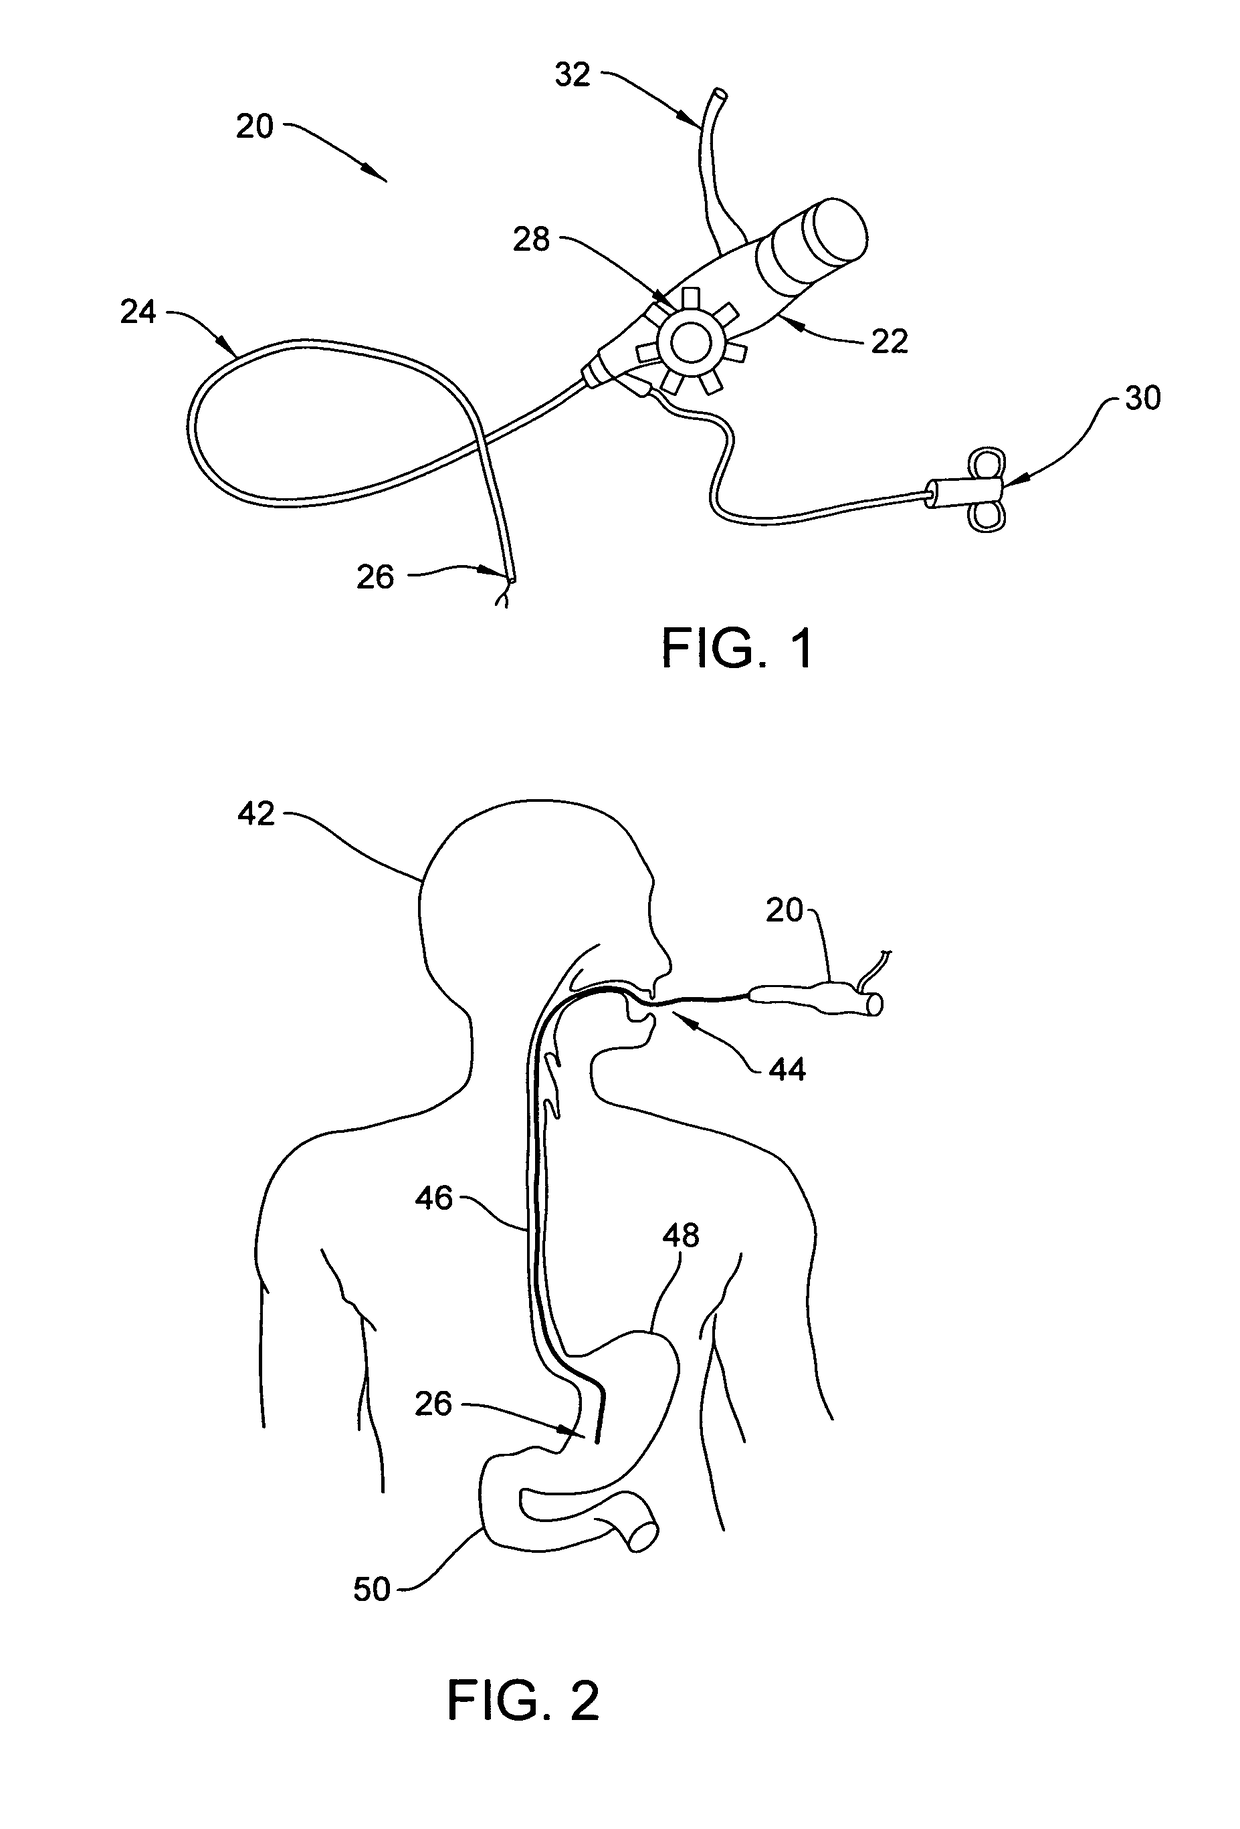 System and method for 3-D tracking of surgical instrument in relation to patient body